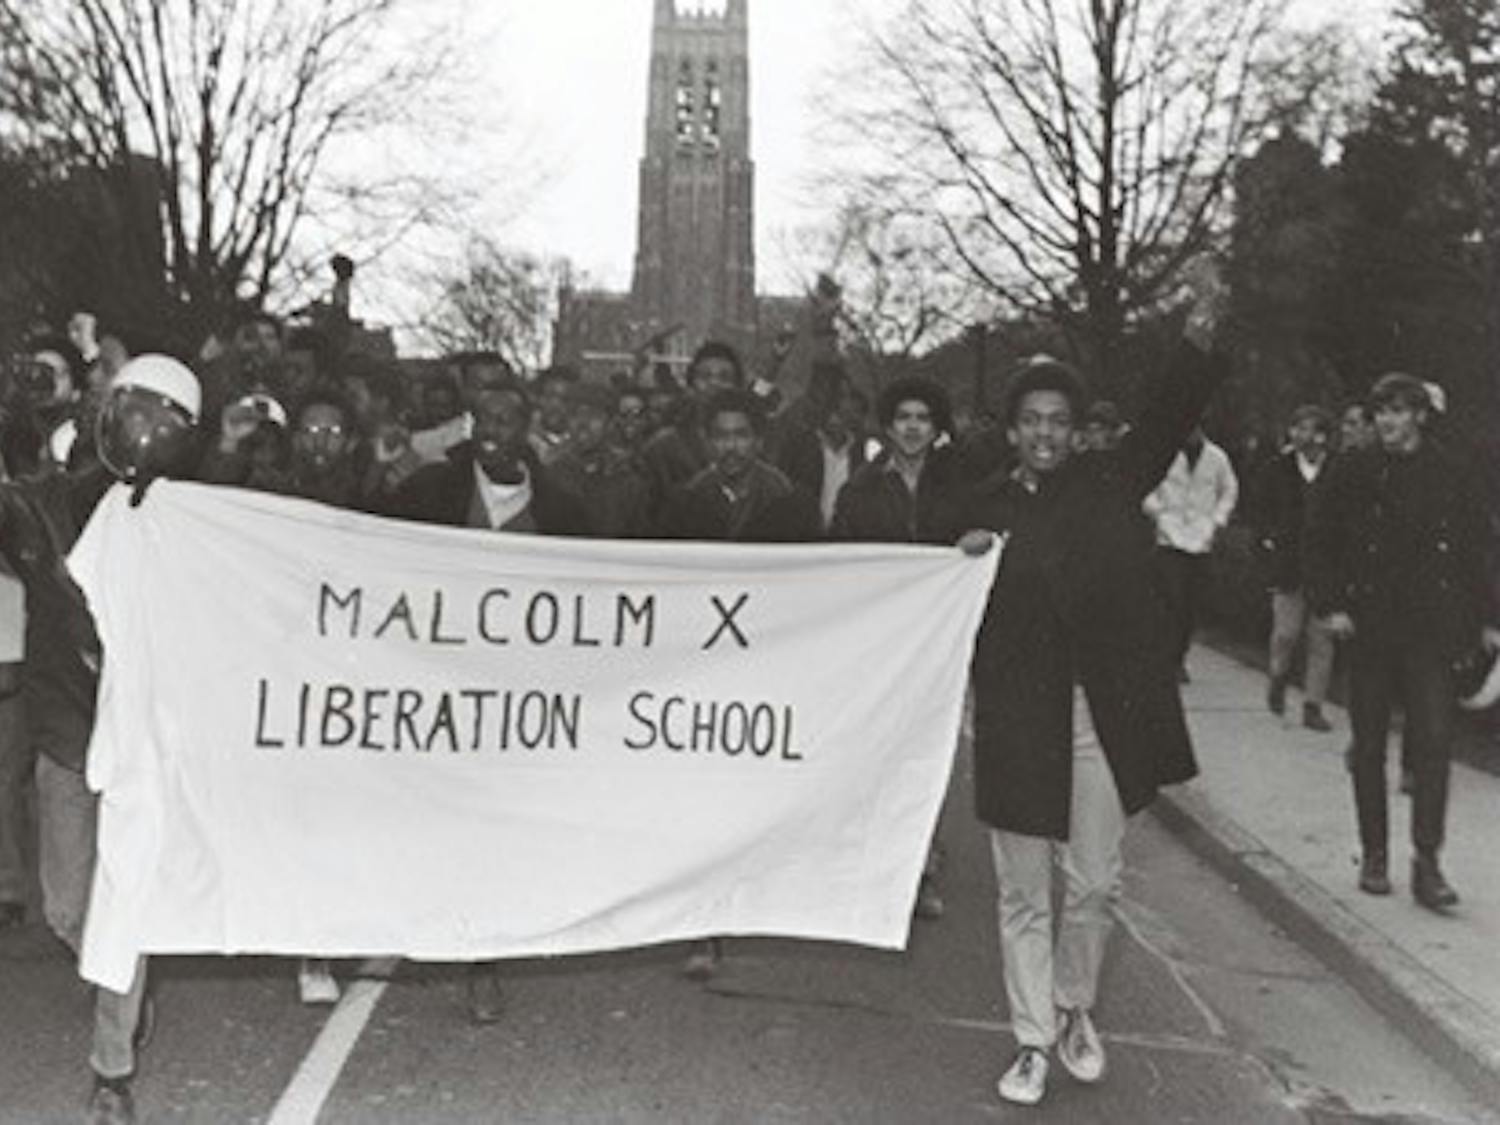 The protesters renamed the Allen Building the Malcolm X Liberation School in solidarity with protests around the country. After vacating the Allen Building, the protesters and their supporters walked down Chapel Drive. Courtesy of the Durham Civil Rights Heritage Project (The Herald Sun).
